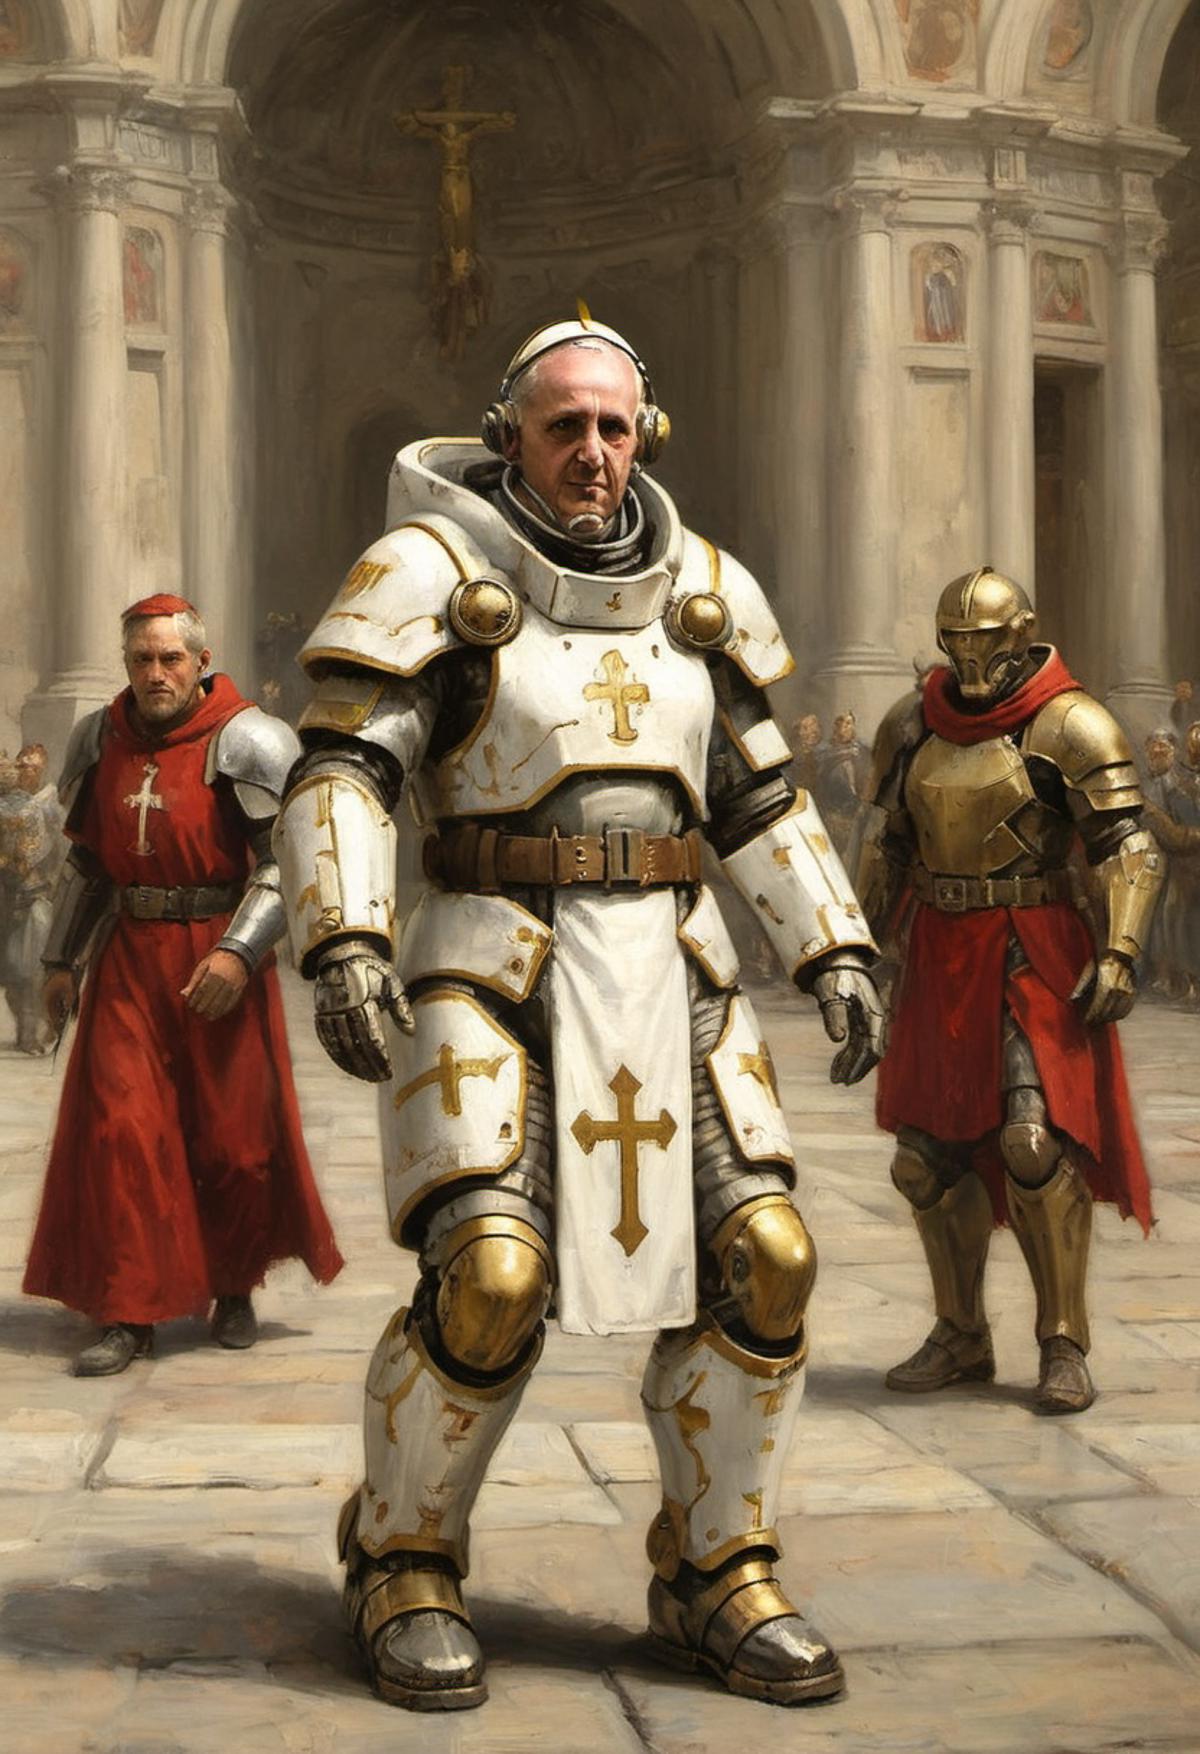 Pope Francis and Knights in Armor at a Cathedral